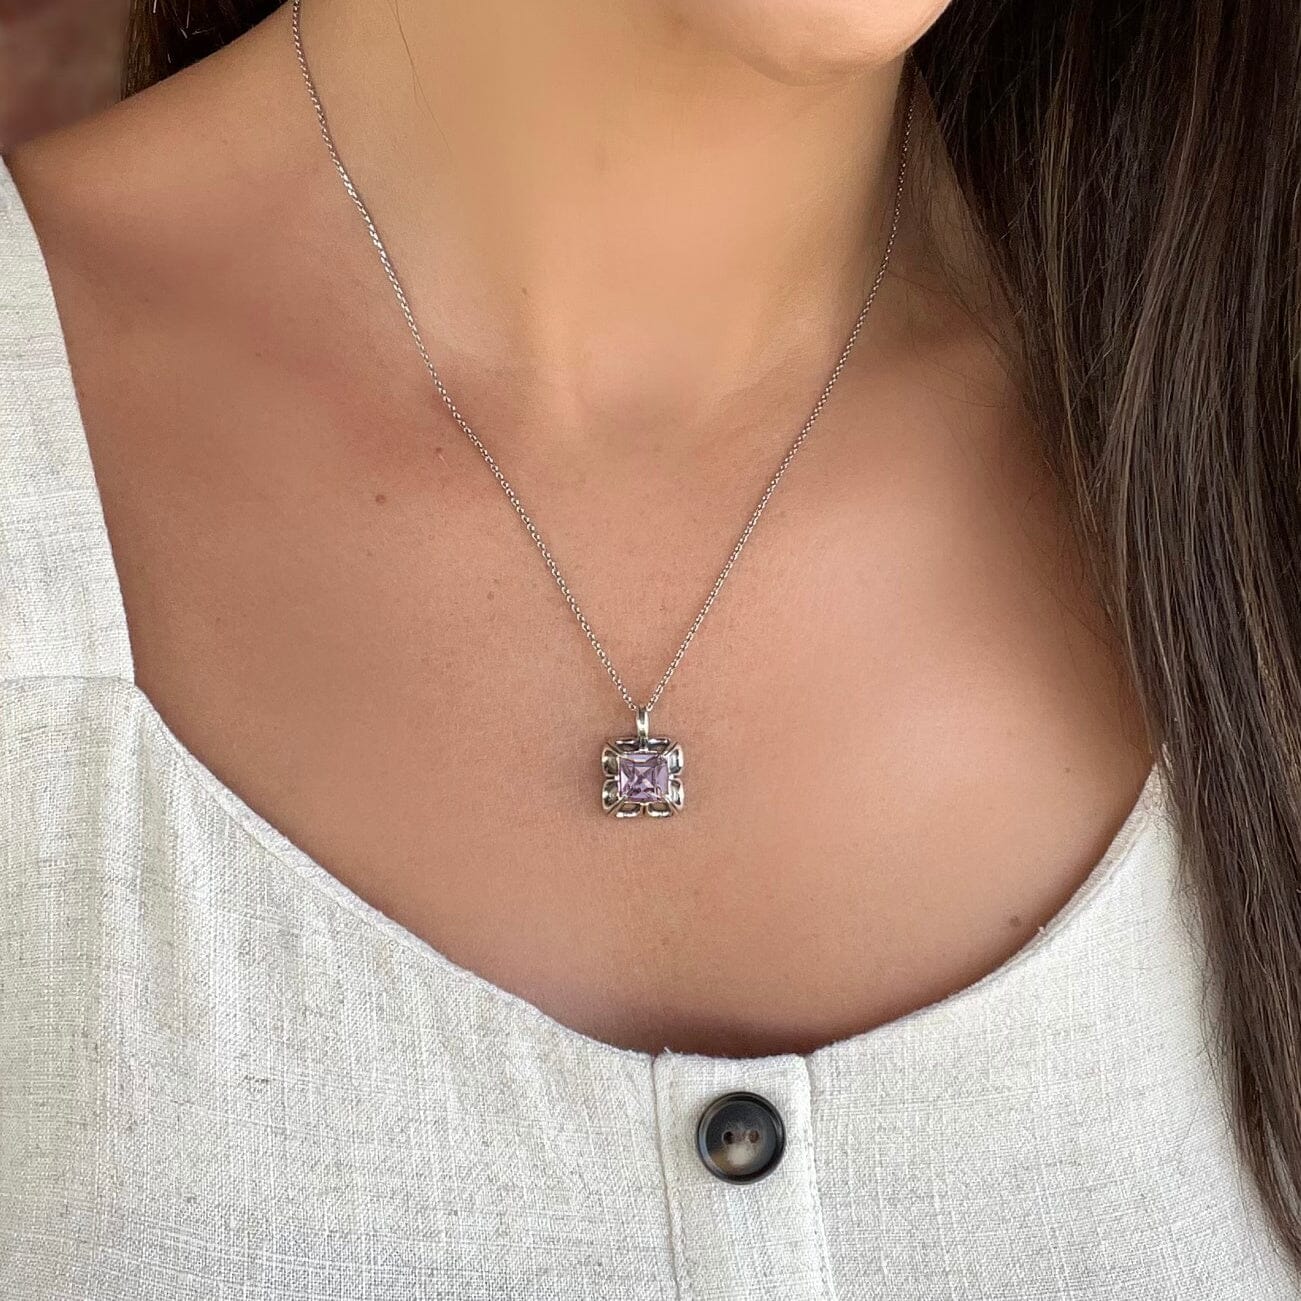 Sterling silver necklace featuring plum pink colored cz stone